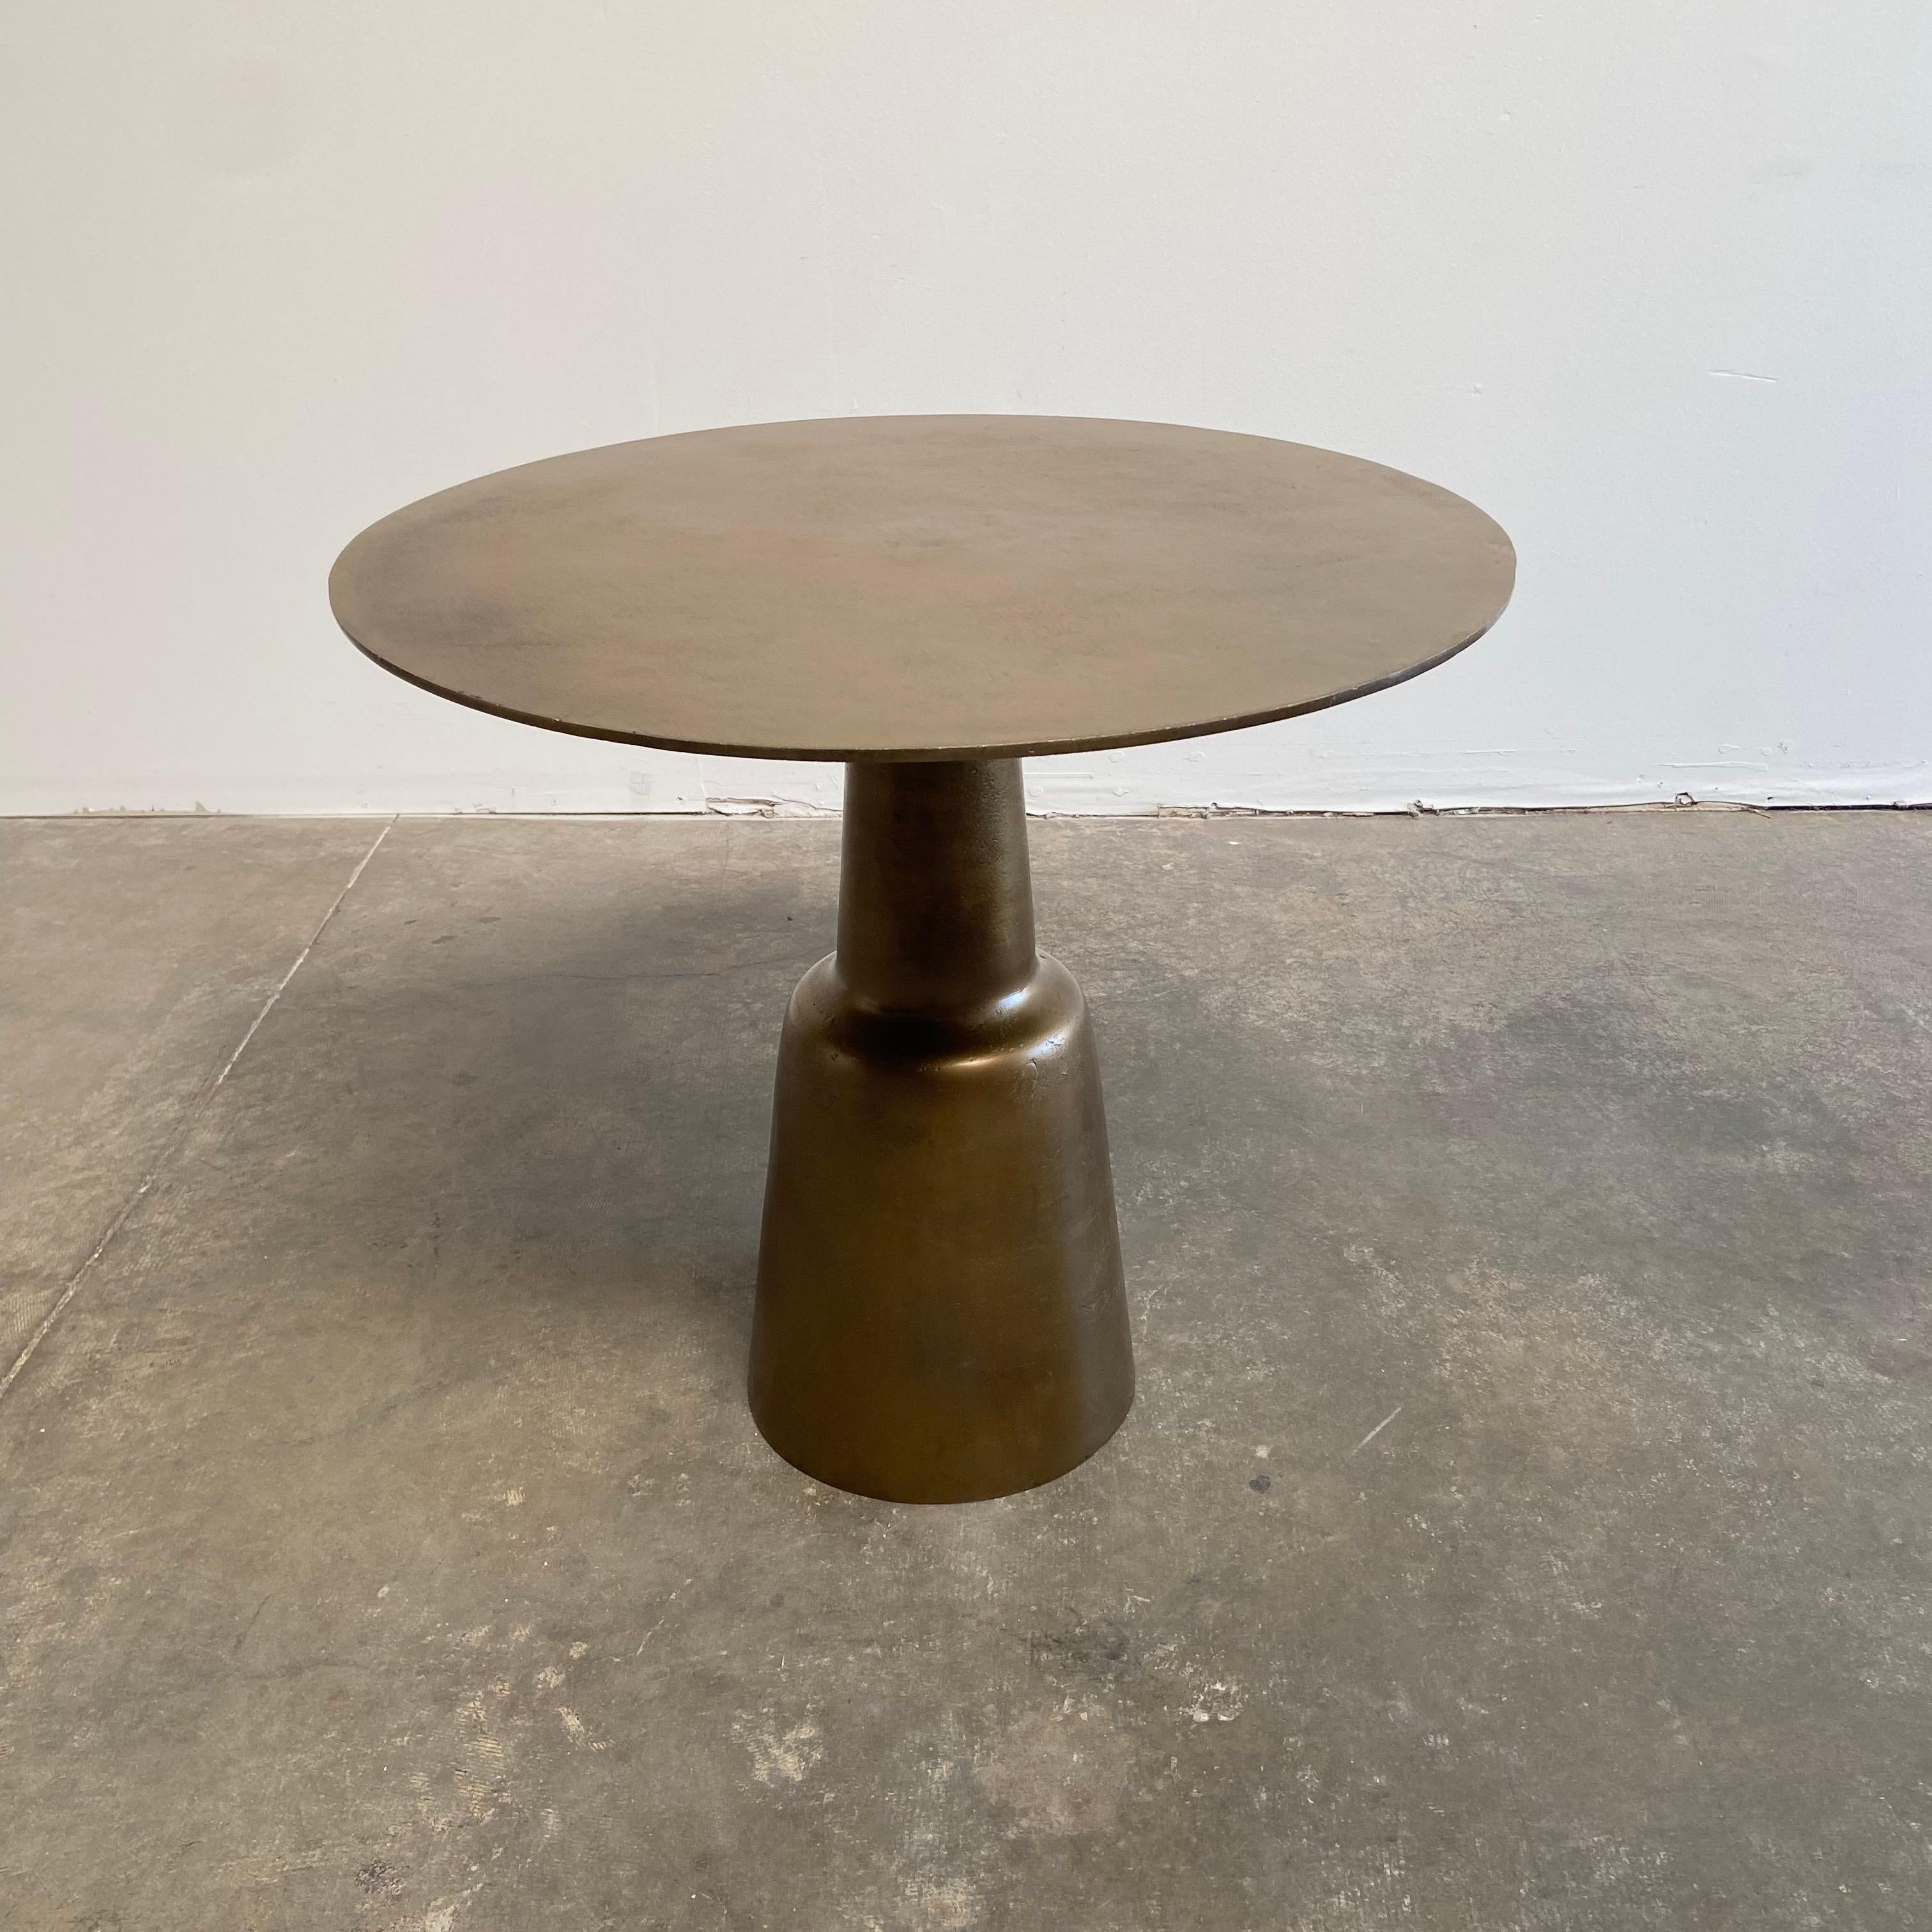 Aged Patina brass finish, this table works well as a bistro table, or use as an entry center table.
The top has a wonderful aged patina, and the finish is of an aged brass.
Size: 31-1/2” RD. X 29” H.
 